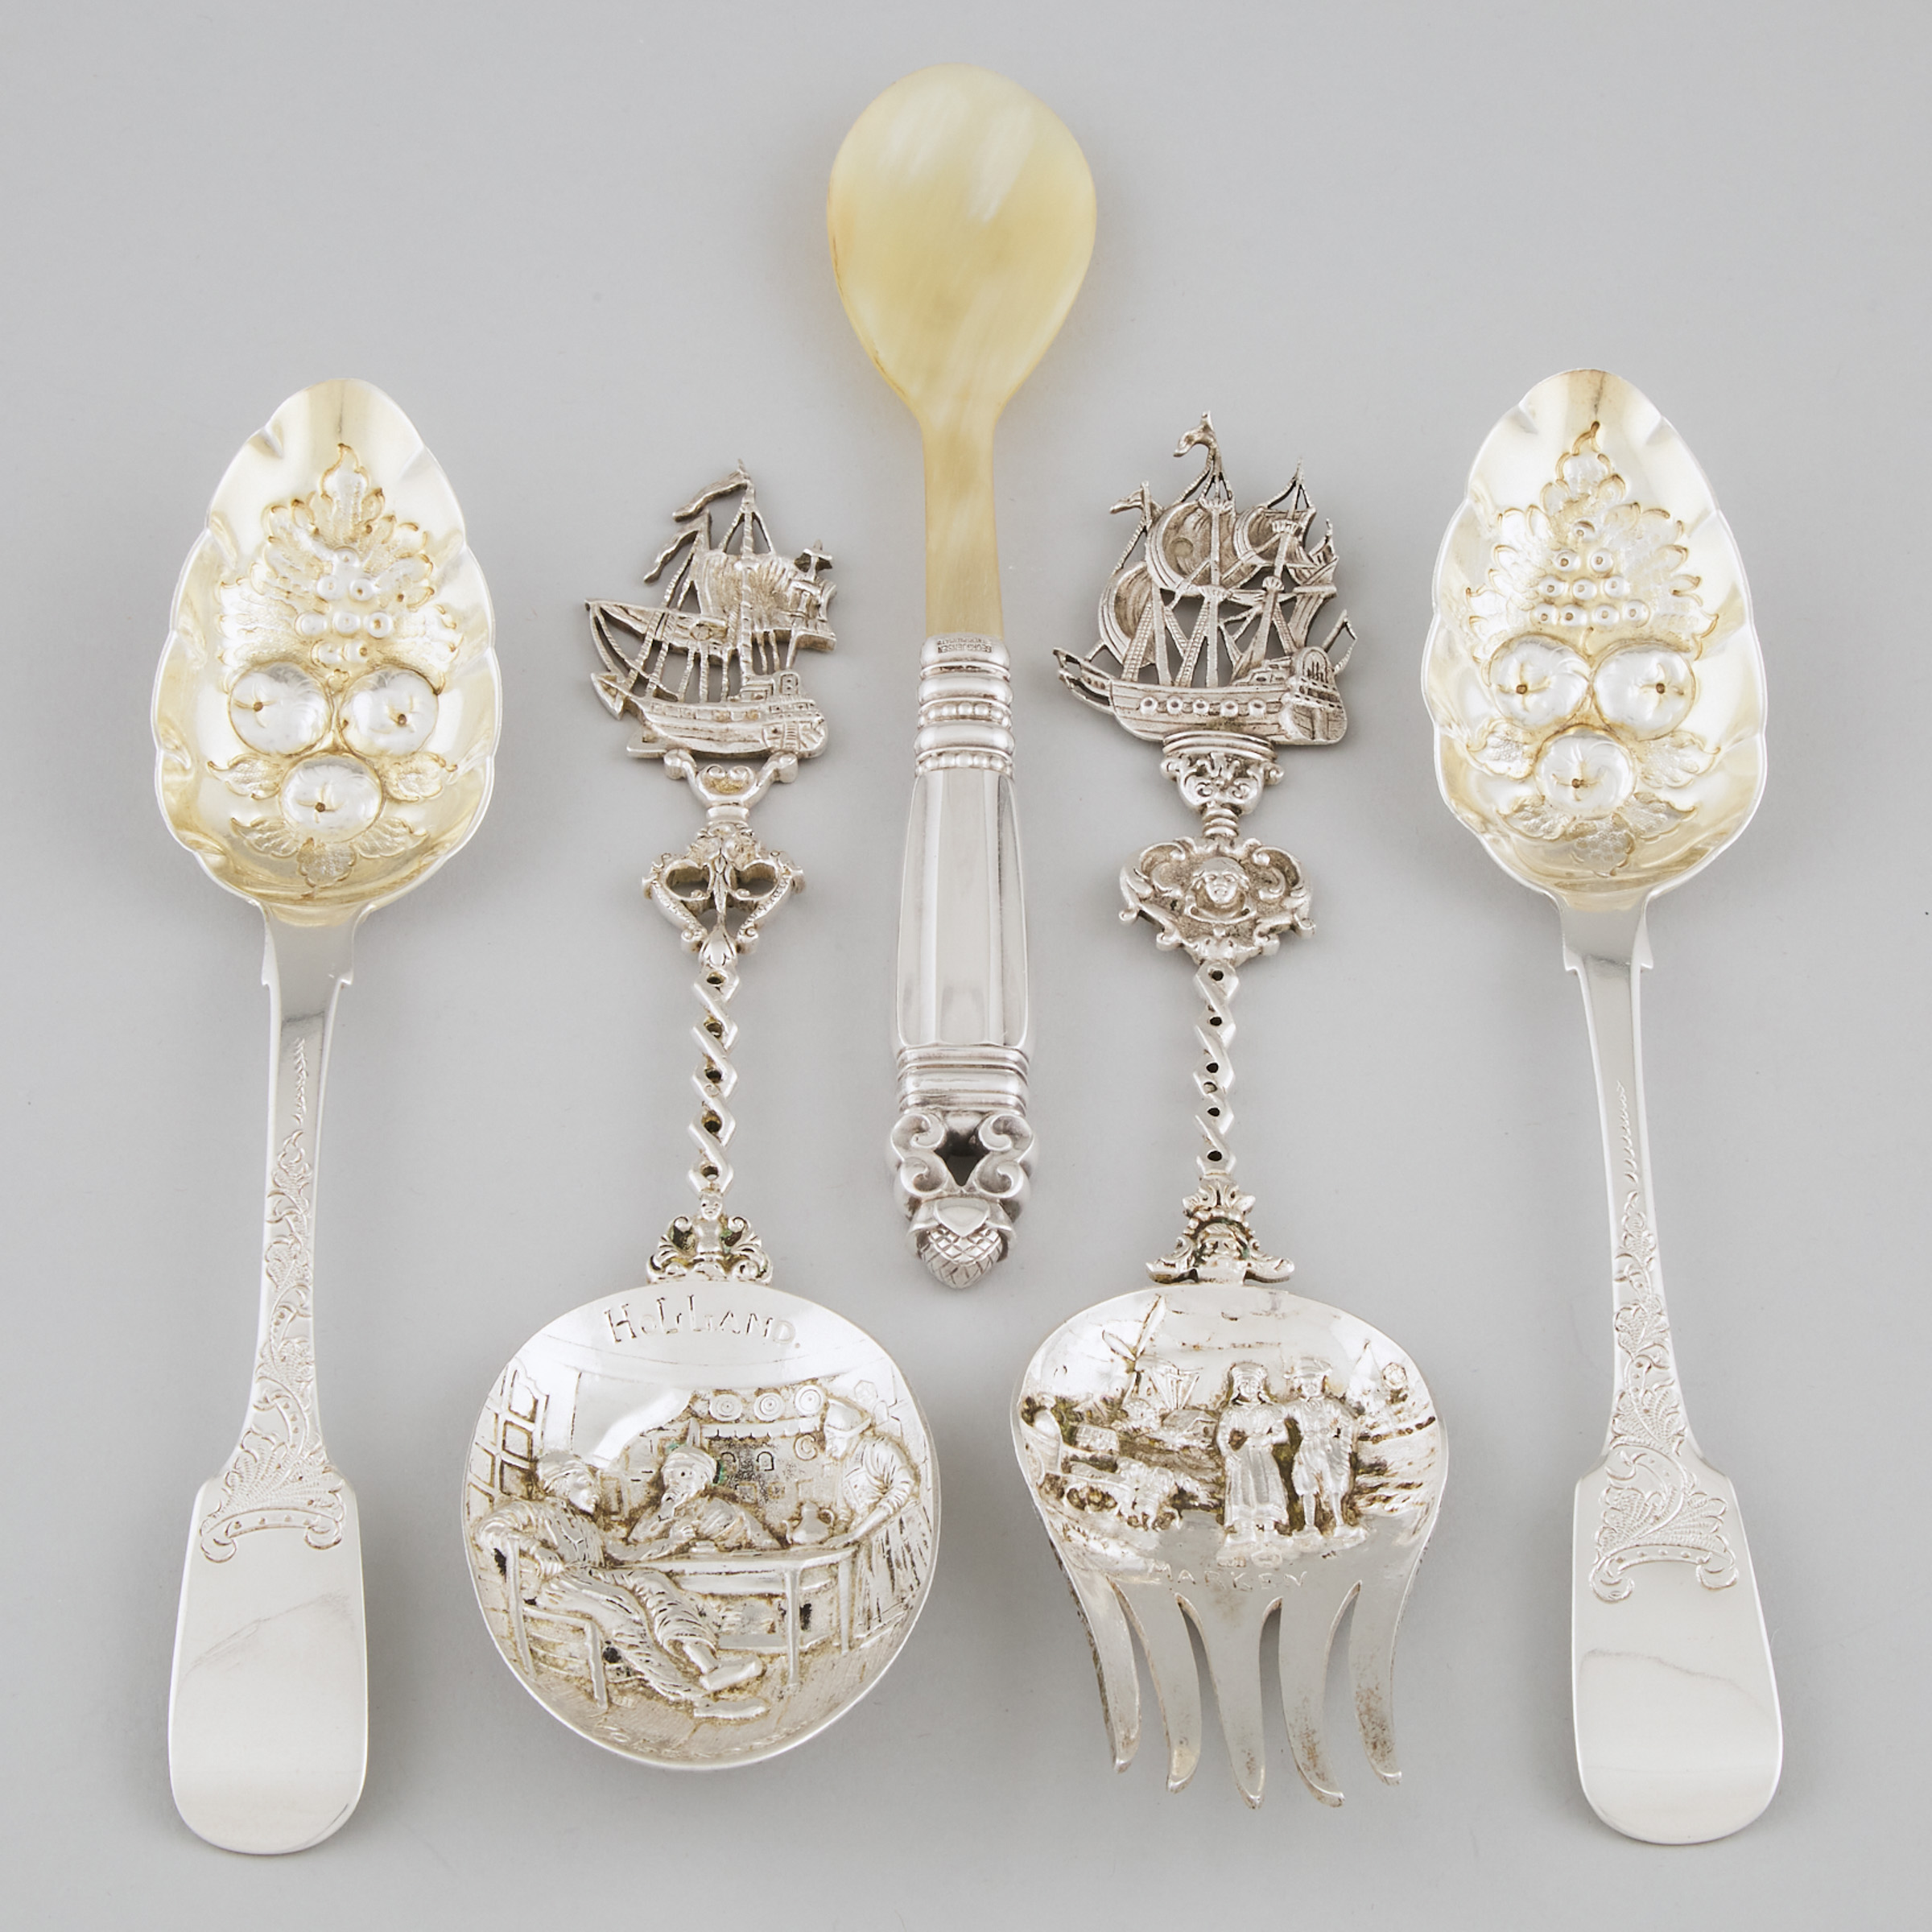 Group of English, Dutch, and Danish Silver Flatware, 19th/20th century